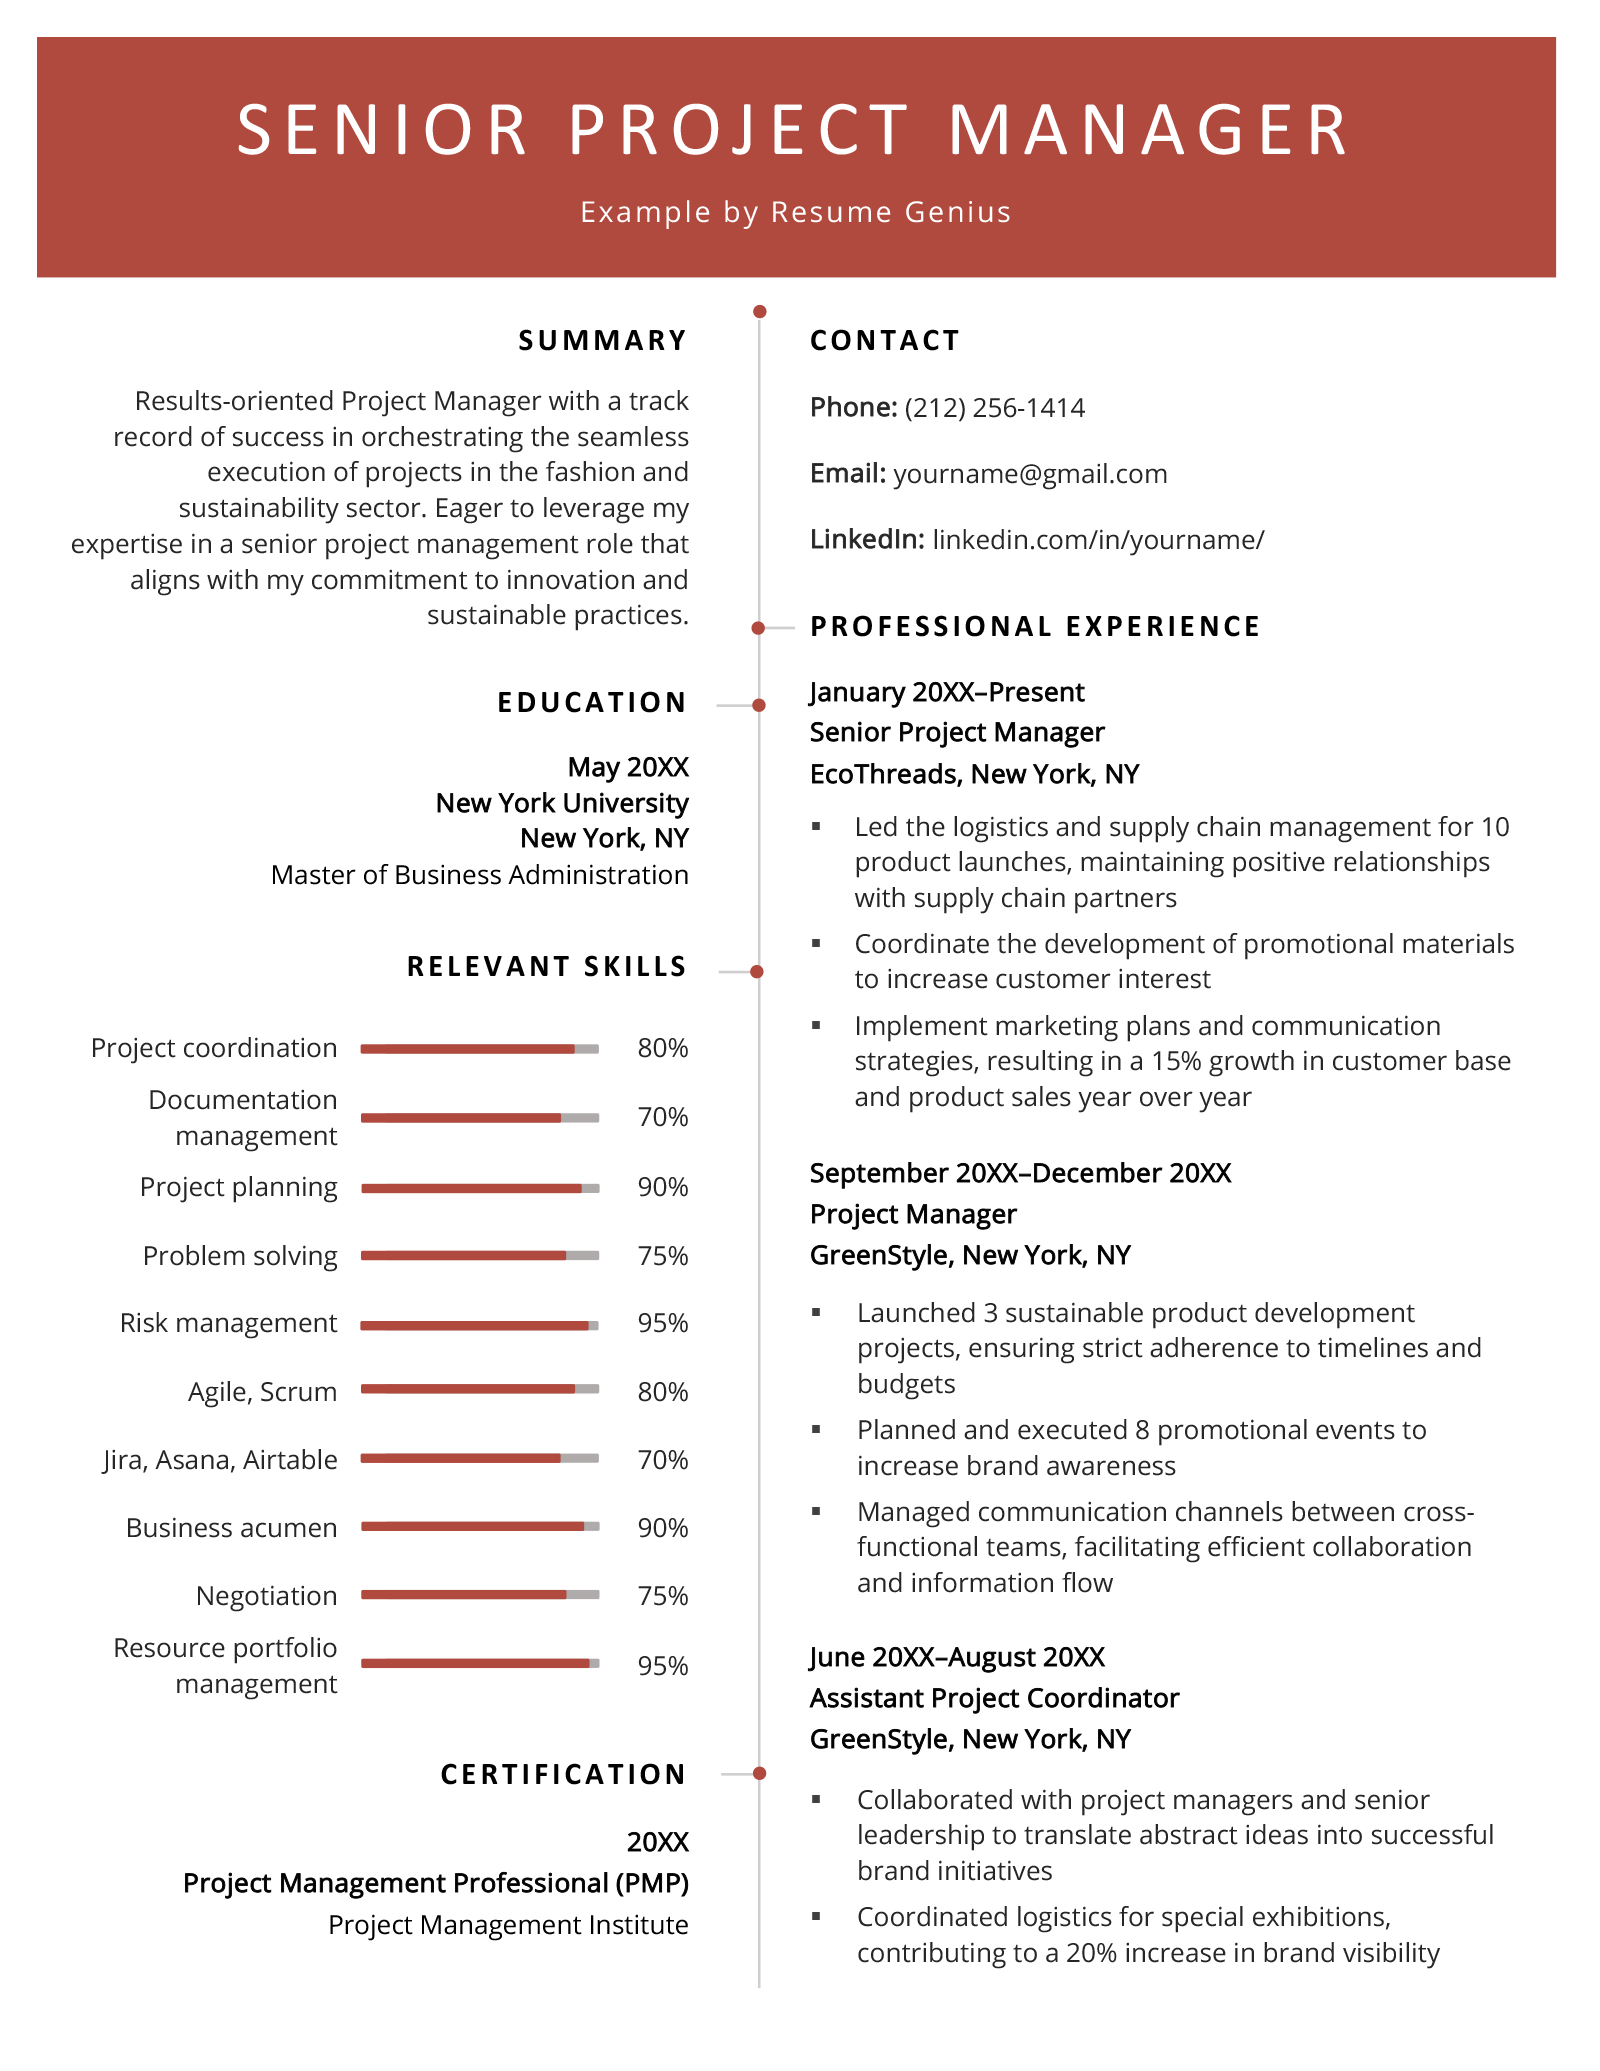 A senior project manager resume sample on a template with a wide red header and red skill bars.